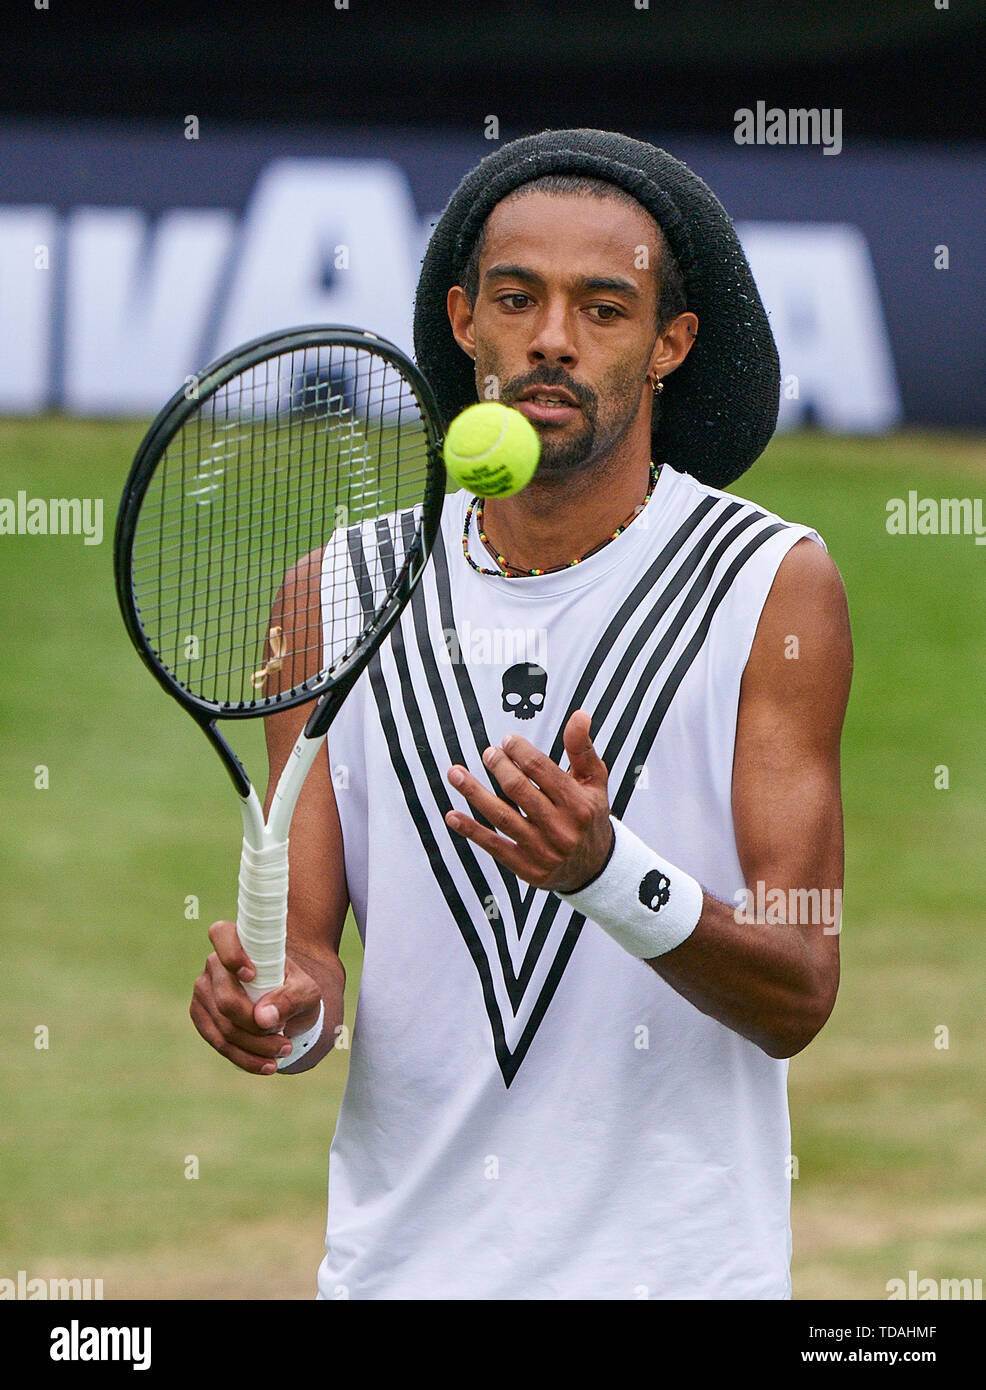 Stuttgart, Germany. 14th June, 2019. Dustin BROWN (GER) in action in his  match against Felix AUGER-ALIASSIME (FRA) at the Tennis ATP Mercedes Cup on  grass in Stuttgart, June 14, 2019. Felix AUGER-ALIASSIME (